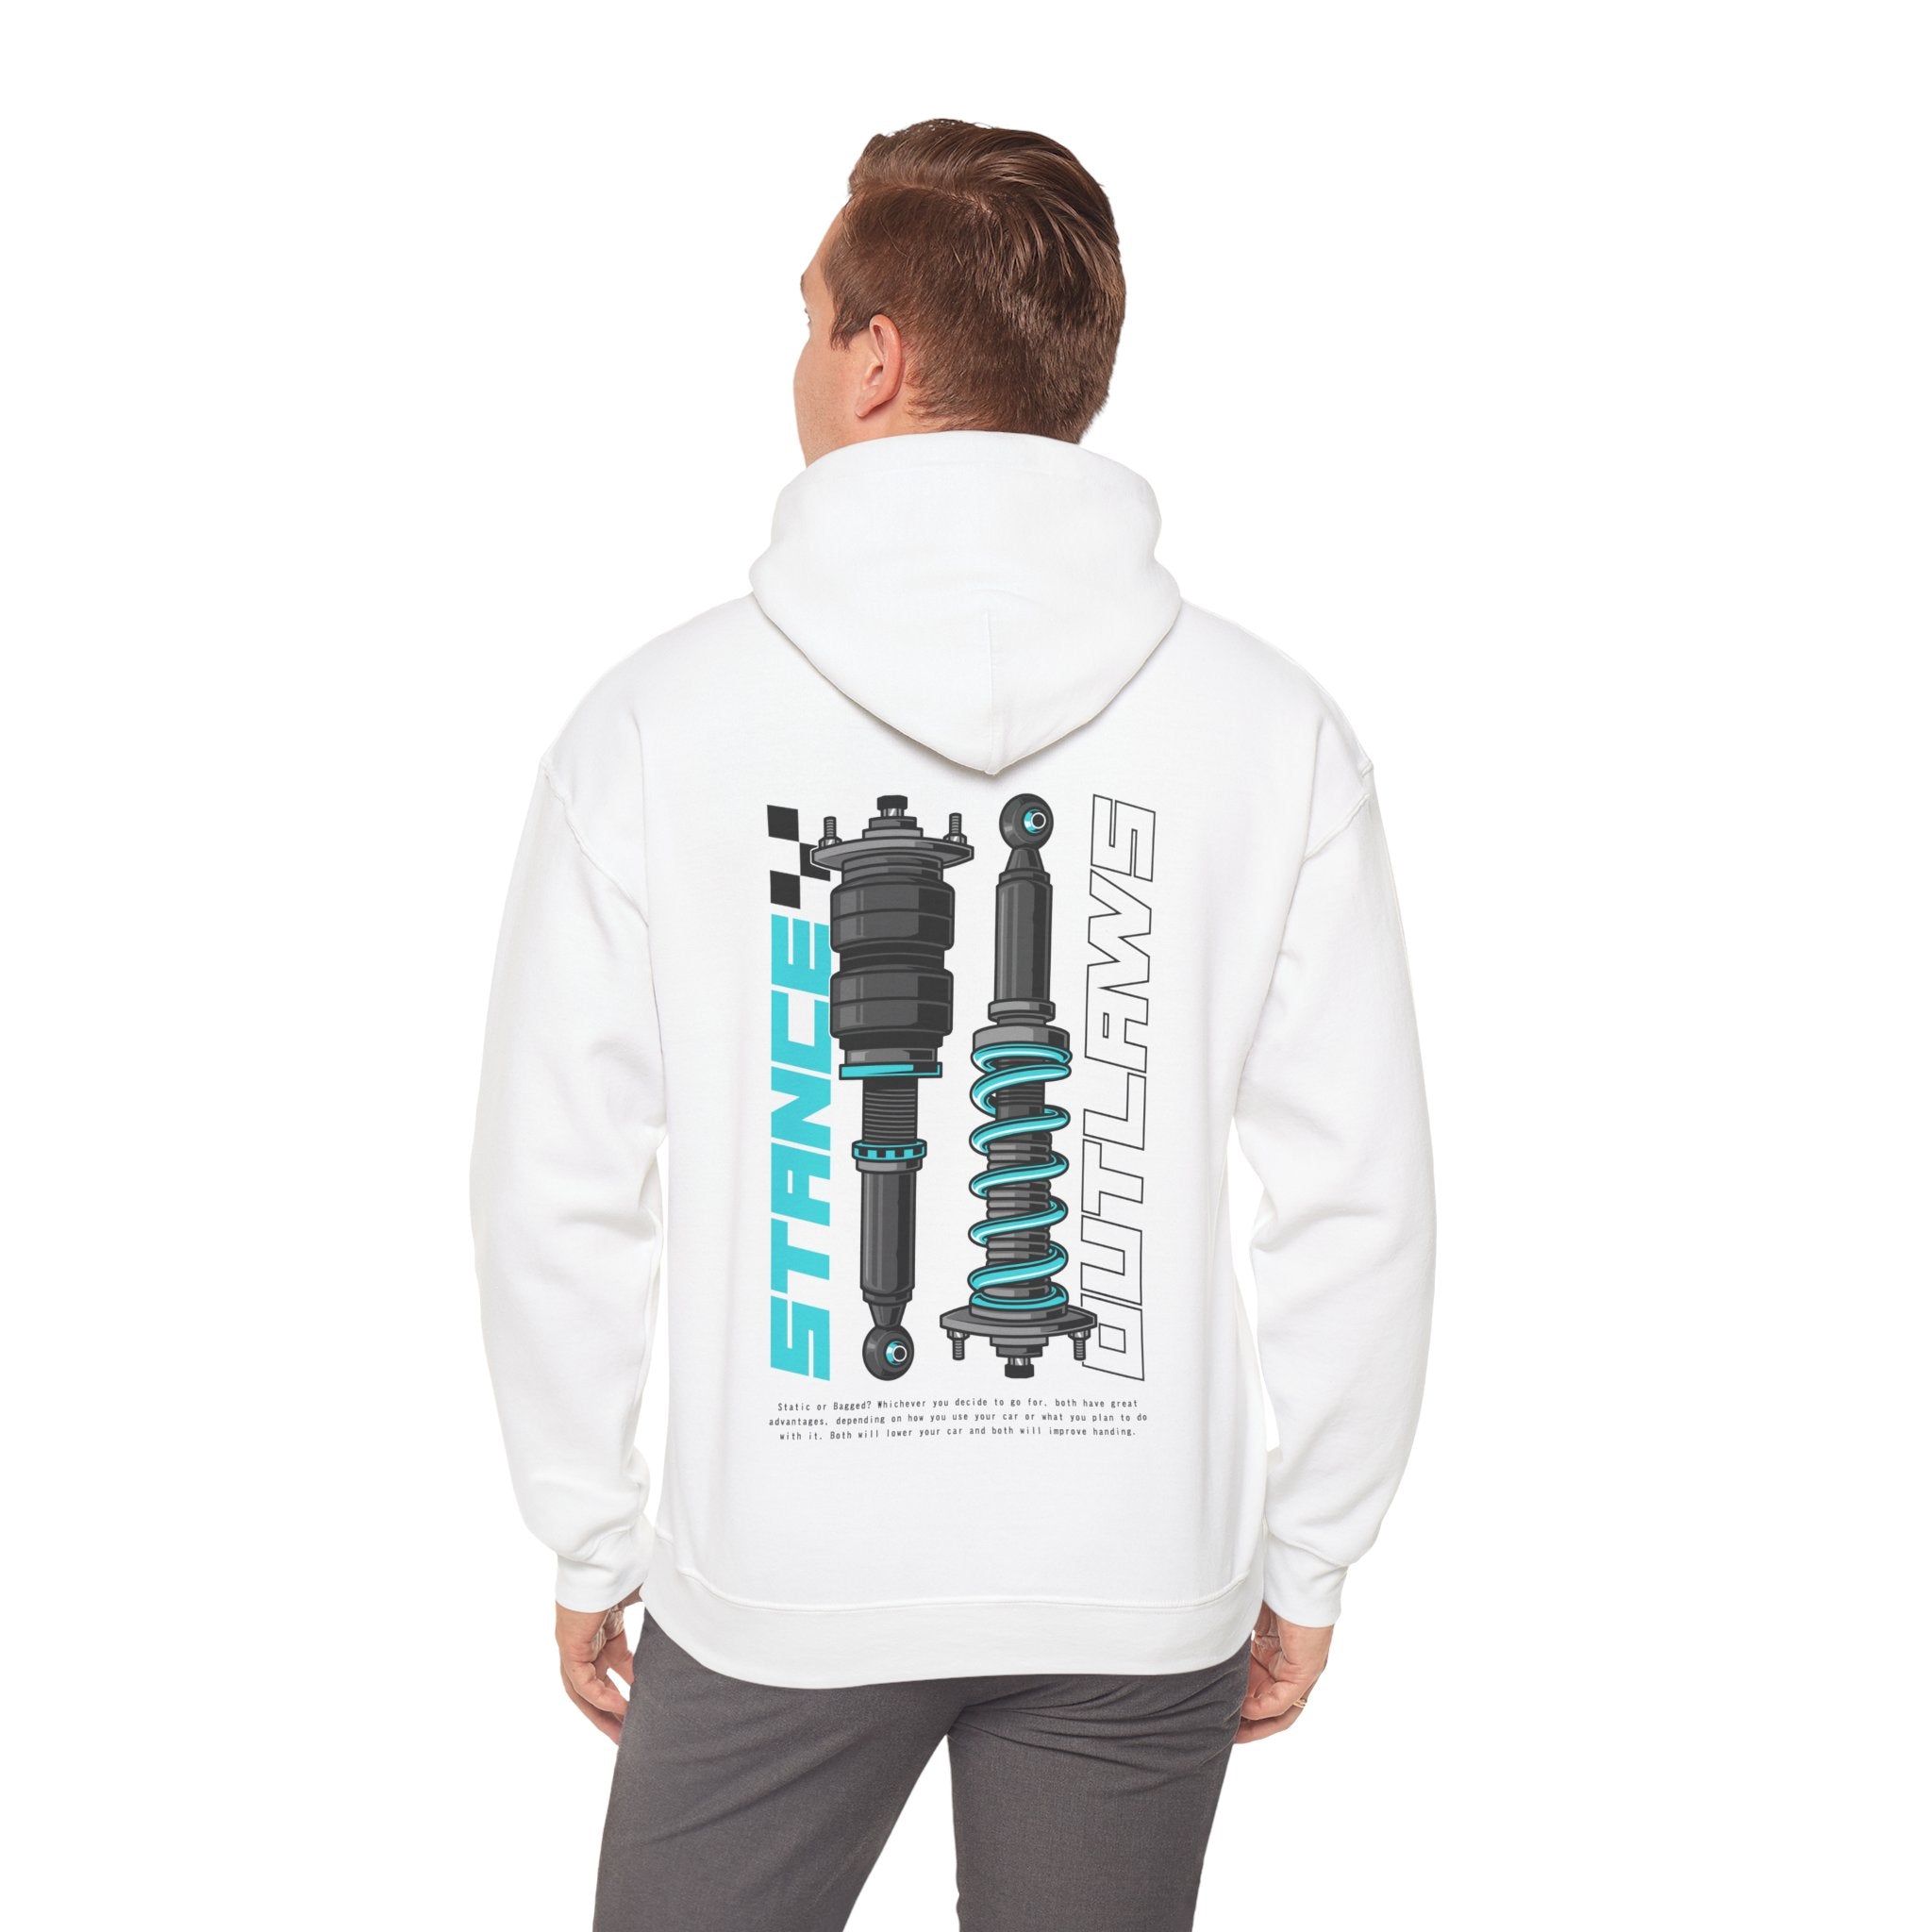 Stance Outlaws Hoodie